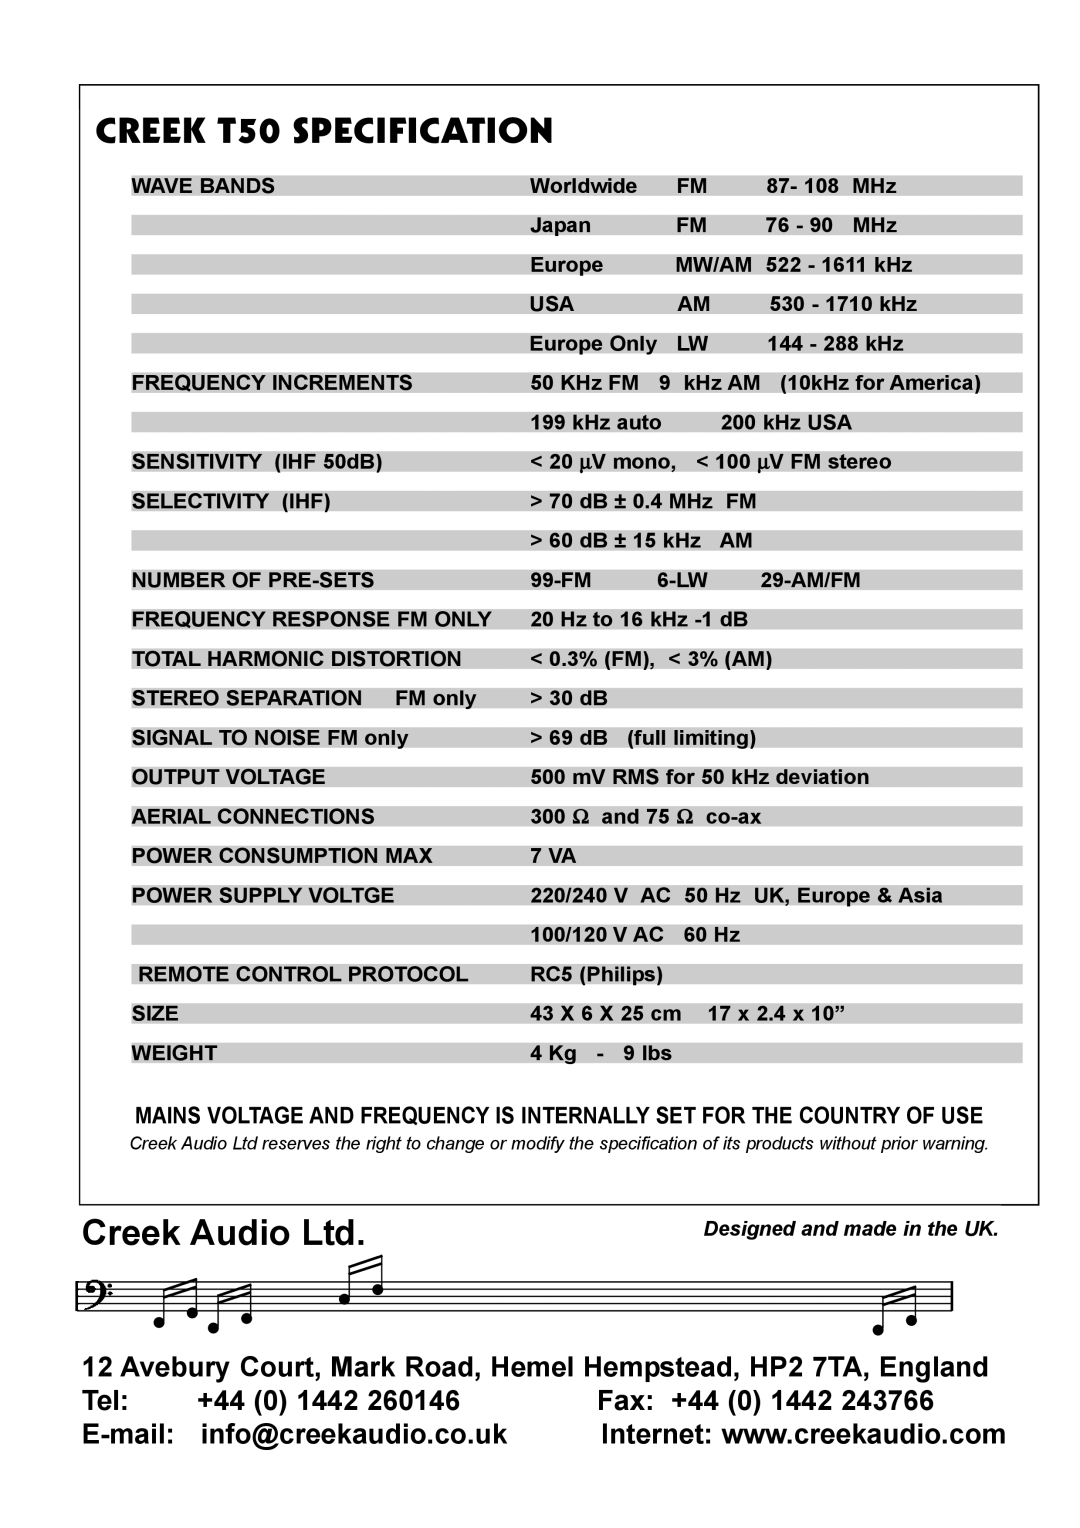 Creek Audio manual CREEK T50 SPECIFICATION, Fax +44, E-mail, info@creekaudio.co.uk, Designed and made in the UK 